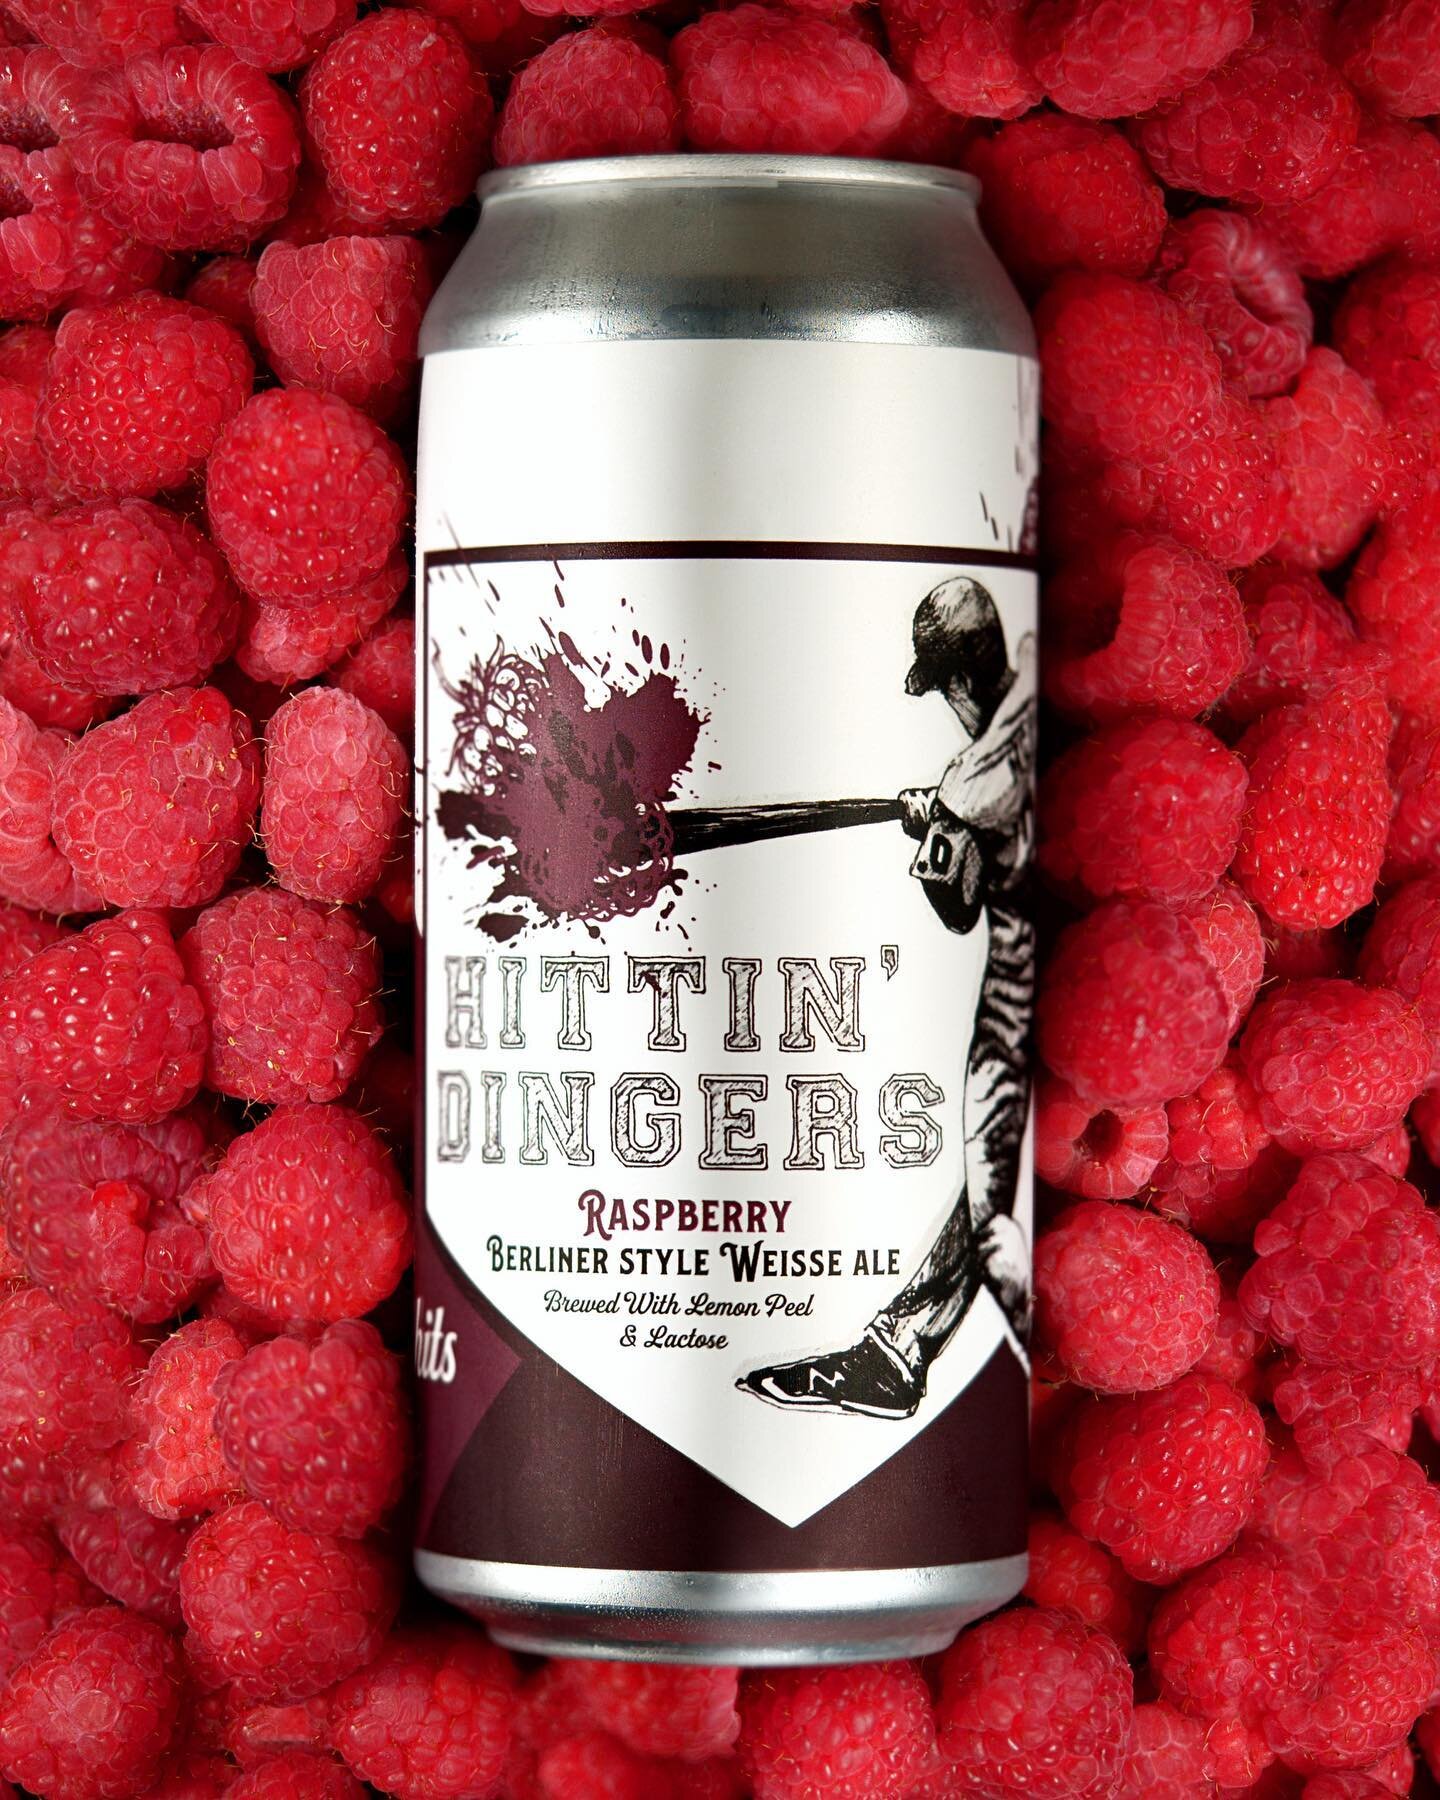 Raspberry is back! The first of it's name. The Mother of Dingers. Our Lead Off batter is back!

#mccallcobeer #allentown #lehighvalley #pabeer #lvbeer #lvbeerweek #pabreweries #pabrewing #brewedinallentown #brewedonsite #brewedbyus #brewedlocal #beer